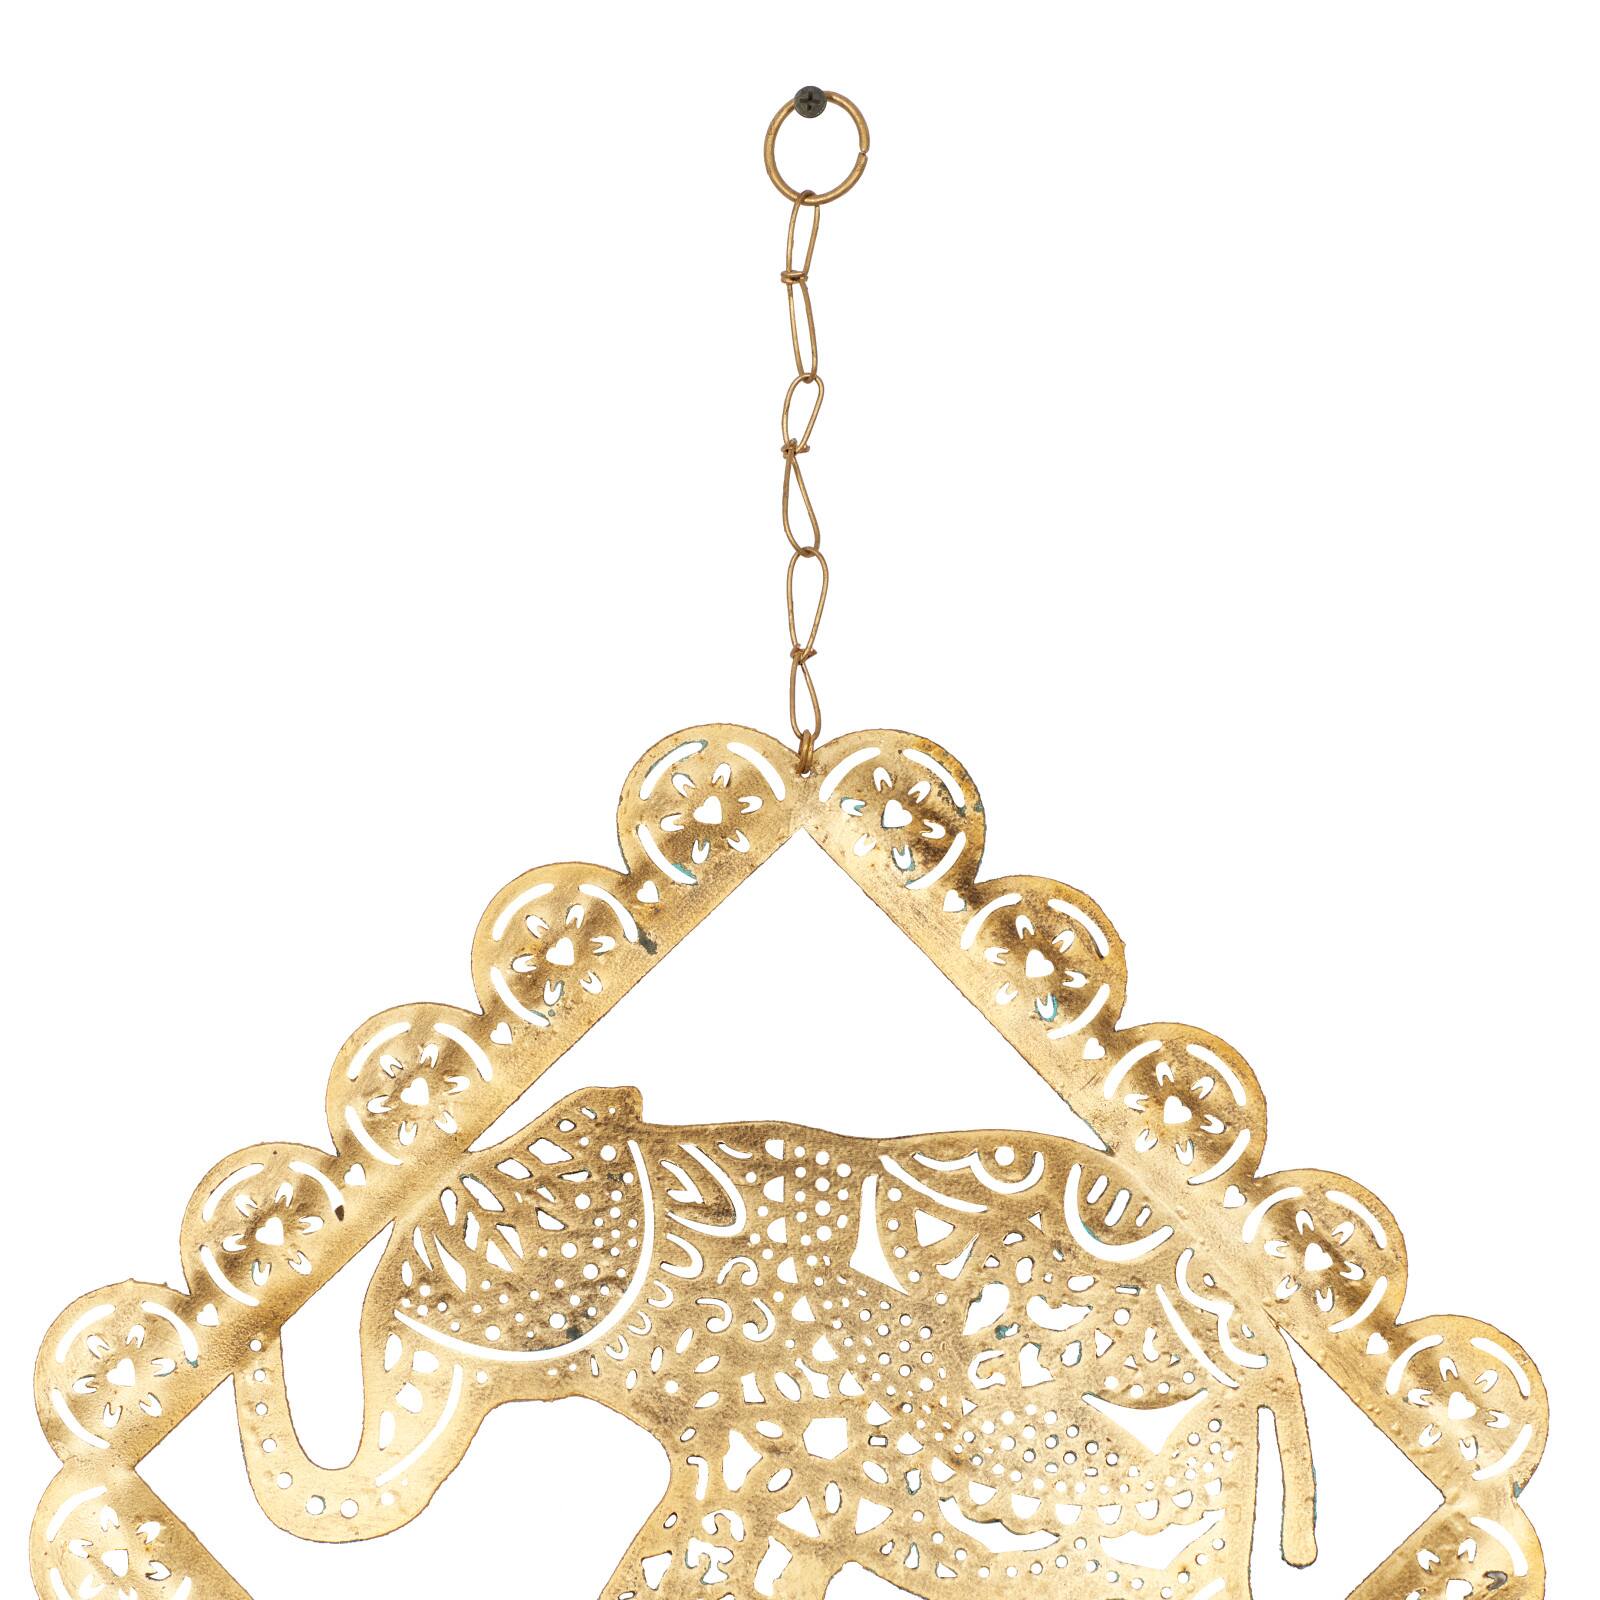 Gold Colored Metal Eclectic Elephant Windchime